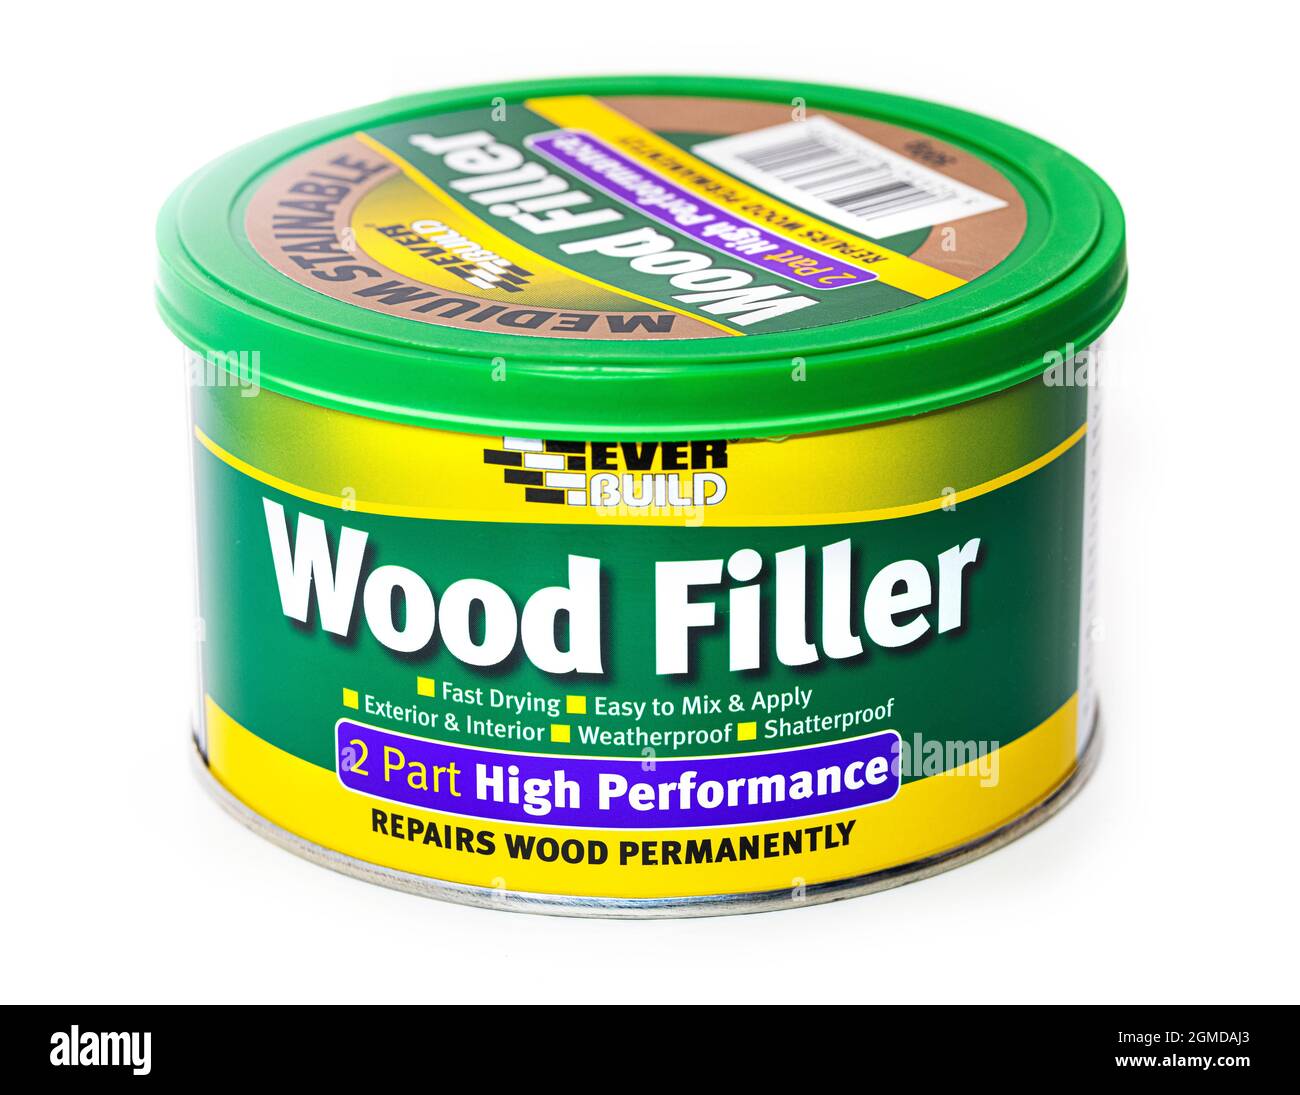 SWINDON, UK - SEPTEMBER 17, 2021: Ever Build Medium Stainable 2 Part High Performance Wood Filler - Repairs Wood Permanently Stock Photo